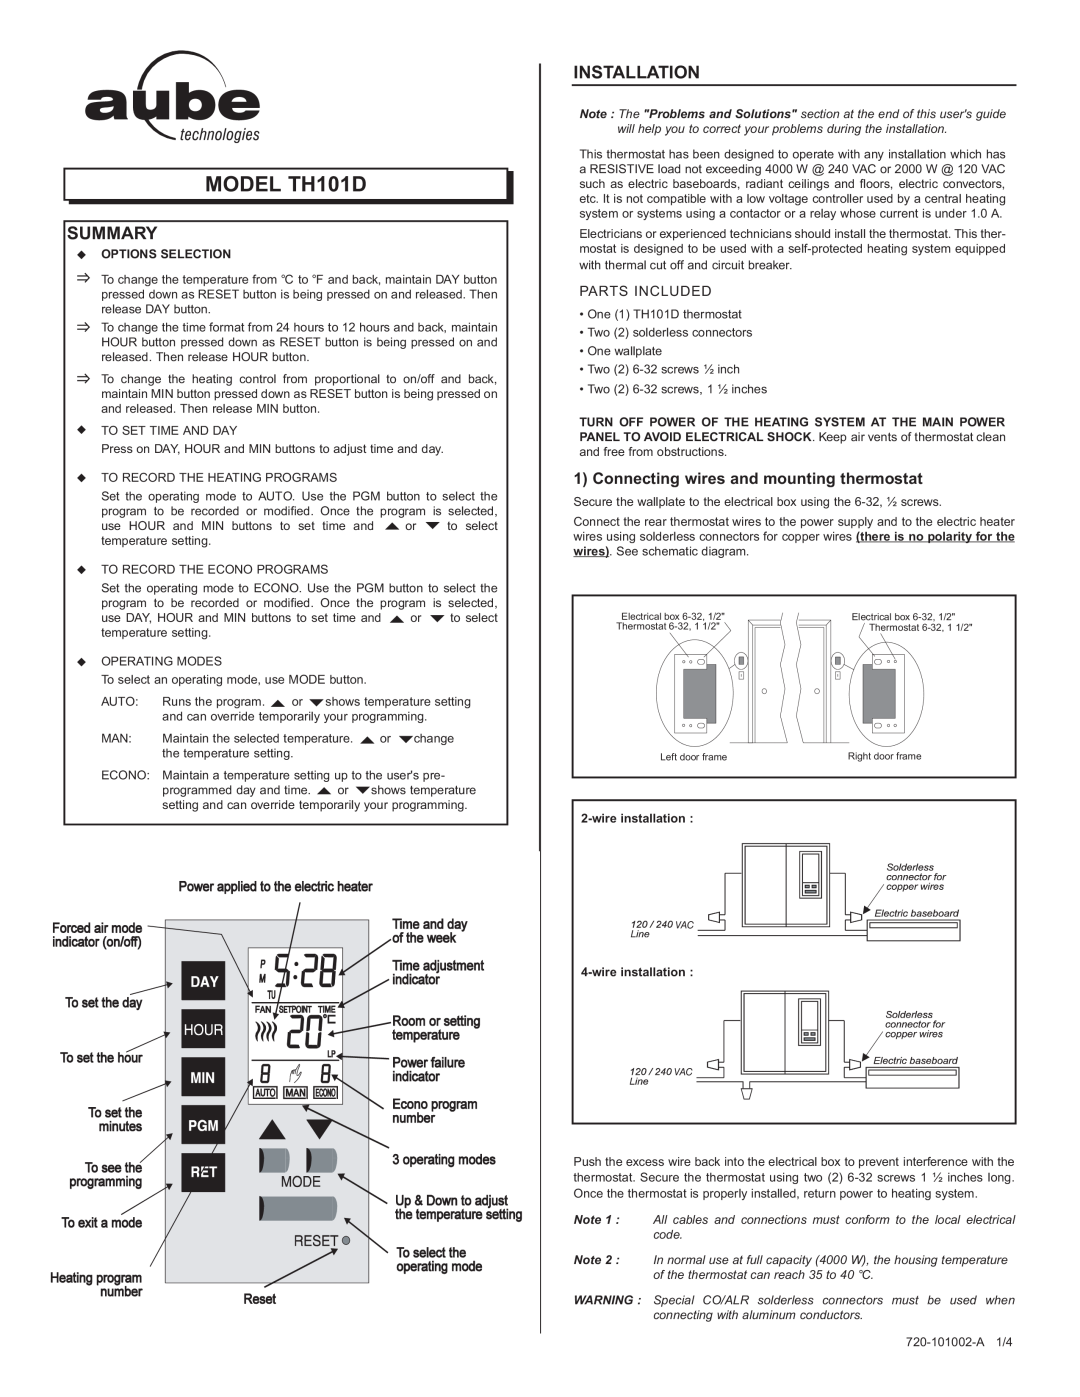 Aube Technologies manual Summary, Installation, Connecting wires and mounting thermostat, MODEL TH101D, Parts Included 